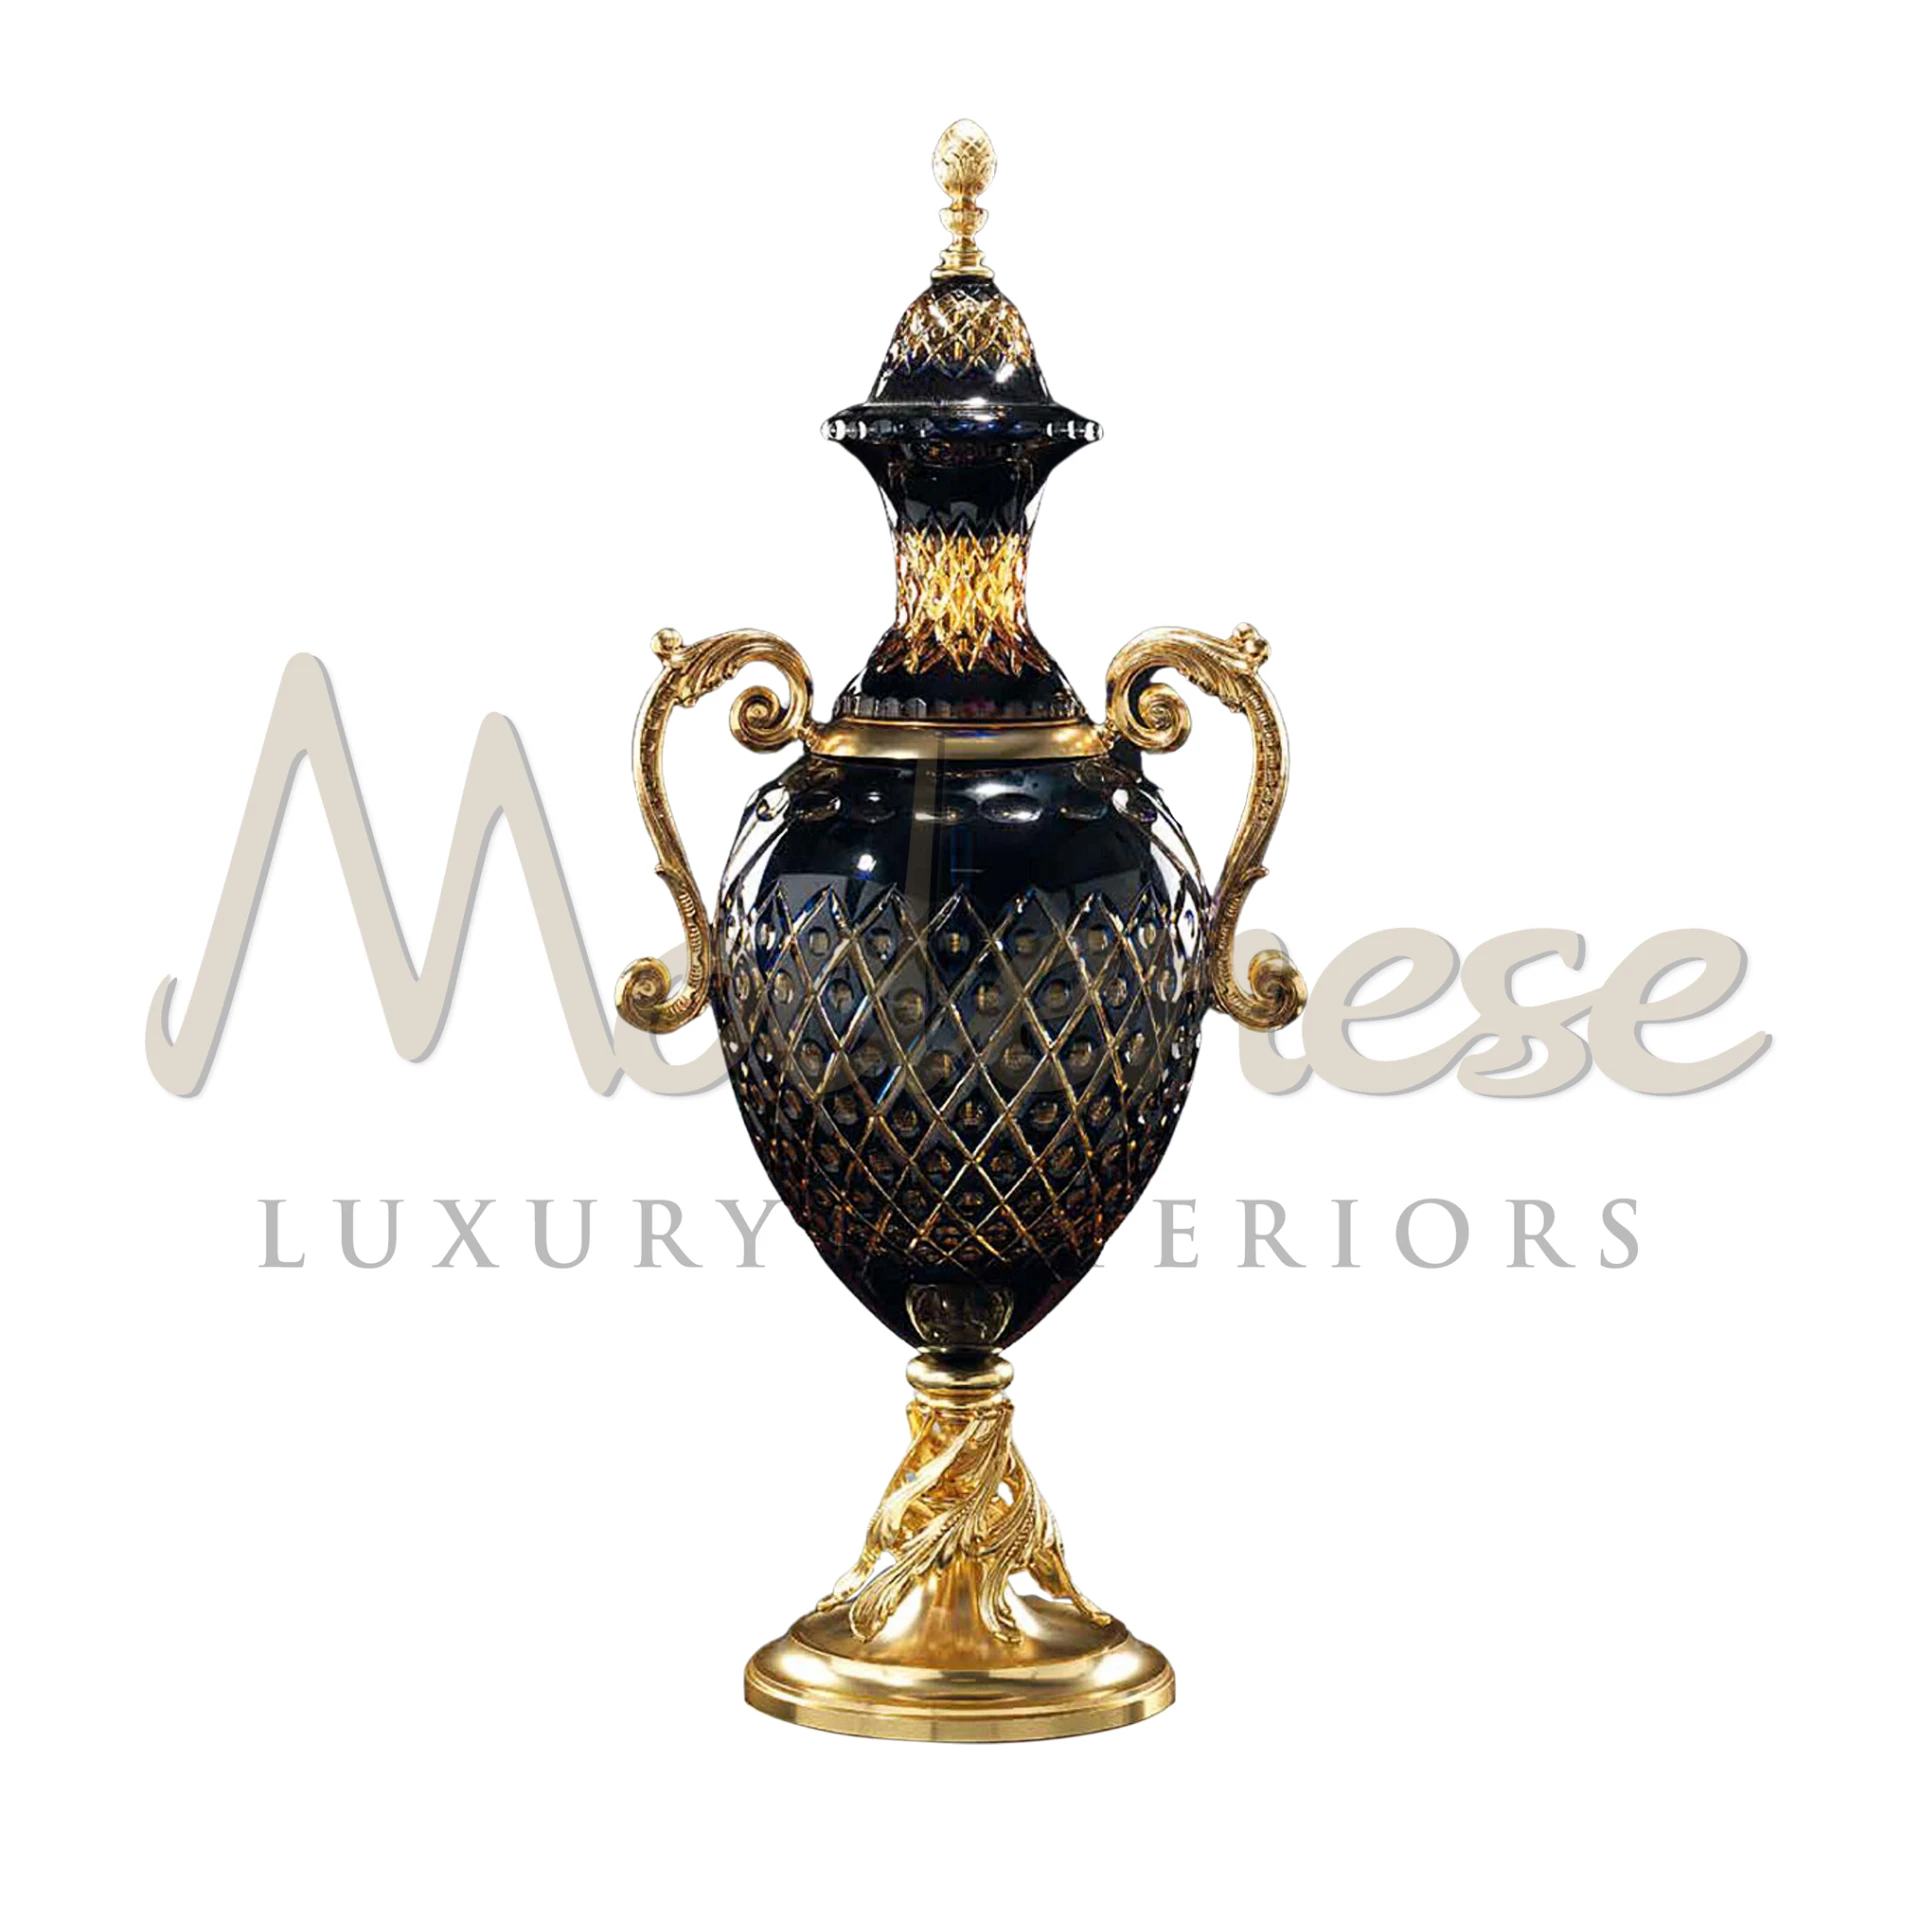 Oversized Giant Glass Amphora by Modenese, exuding grandeur with ancient Greek design, ideal for making a bold statement in luxury interiors.







